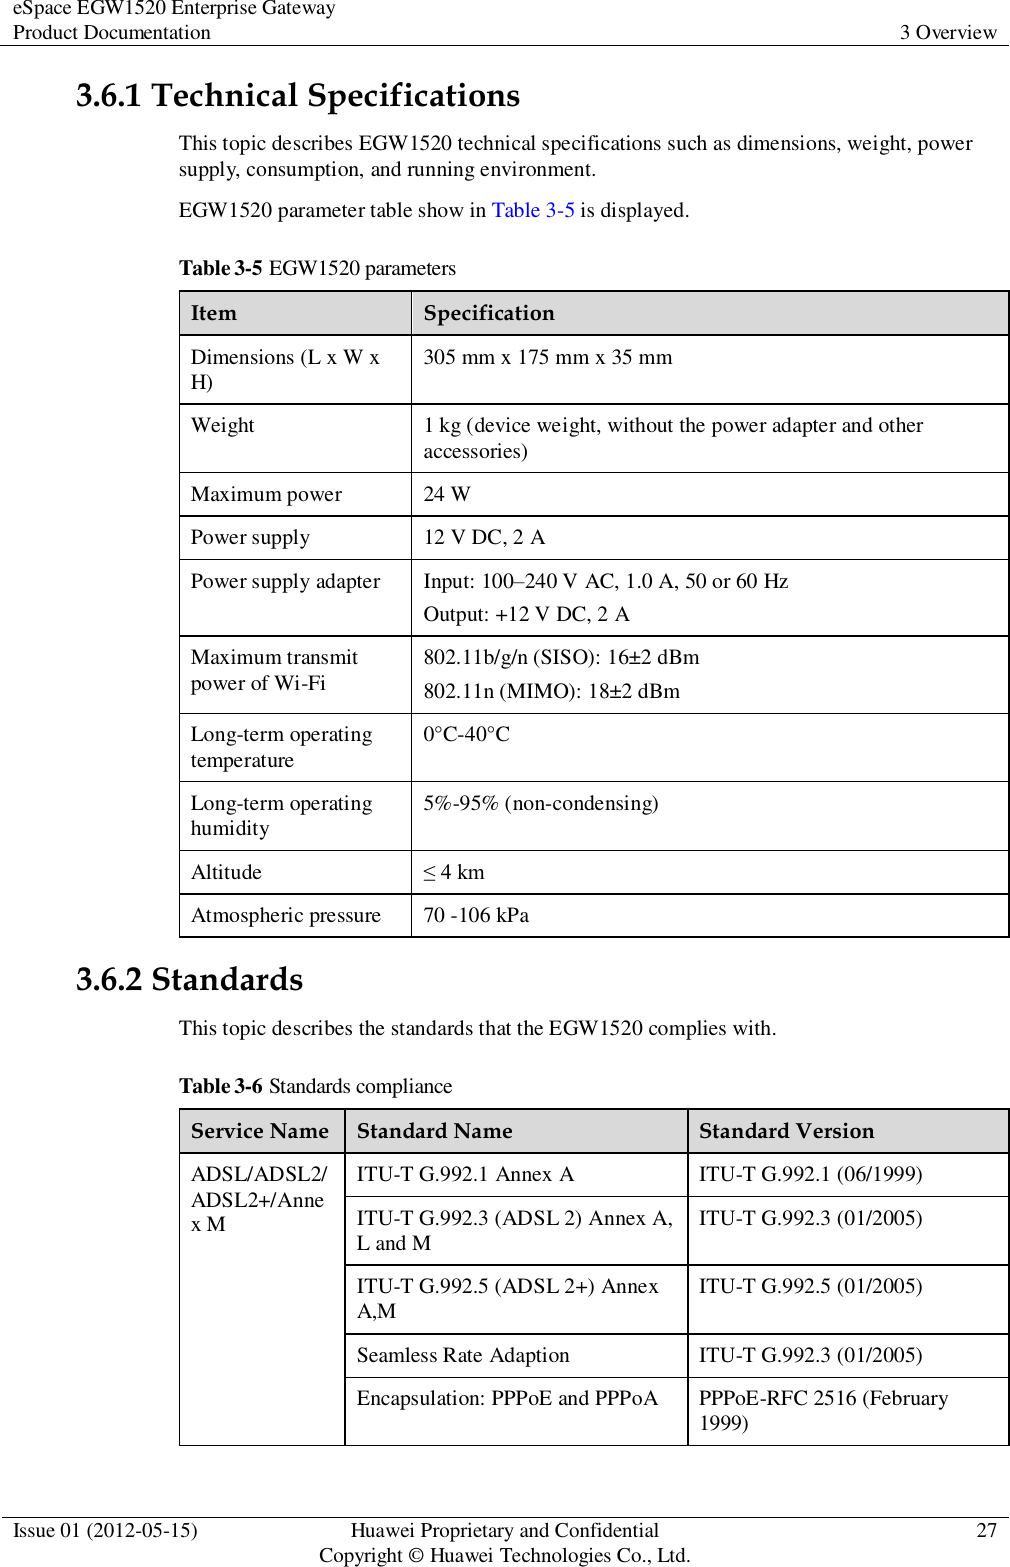 eSpace EGW1520 Enterprise Gateway Product Documentation 3 Overview  Issue 01 (2012-05-15) Huawei Proprietary and Confidential                                     Copyright © Huawei Technologies Co., Ltd. 27  3.6.1 Technical Specifications This topic describes EGW1520 technical specifications such as dimensions, weight, power supply, consumption, and running environment. EGW1520 parameter table show in Table 3-5 is displayed. Table 3-5 EGW1520 parameters Item Specification Dimensions (L x W x H) 305 mm x 175 mm x 35 mm Weight 1 kg (device weight, without the power adapter and other accessories) Maximum power 24 W Power supply 12 V DC, 2 A Power supply adapter Input: 100–240 V AC, 1.0 A, 50 or 60 Hz Output: +12 V DC, 2 A Maximum transmit power of Wi-Fi 802.11b/g/n (SISO): 16±2 dBm 802.11n (MIMO): 18±2 dBm Long-term operating temperature 0°C-40°C Long-term operating humidity 5%-95% (non-condensing) Altitude ≤ 4 km Atmospheric pressure 70 -106 kPa 3.6.2 Standards This topic describes the standards that the EGW1520 complies with. Table 3-6 Standards compliance Service Name Standard Name Standard Version ADSL/ADSL2/ADSL2+/Annex M ITU-T G.992.1 Annex A ITU-T G.992.1 (06/1999) ITU-T G.992.3 (ADSL 2) Annex A, L and M ITU-T G.992.3 (01/2005) ITU-T G.992.5 (ADSL 2+) Annex A,M   ITU-T G.992.5 (01/2005) Seamless Rate Adaption ITU-T G.992.3 (01/2005) Encapsulation: PPPoE and PPPoA PPPoE-RFC 2516 (February 1999) 